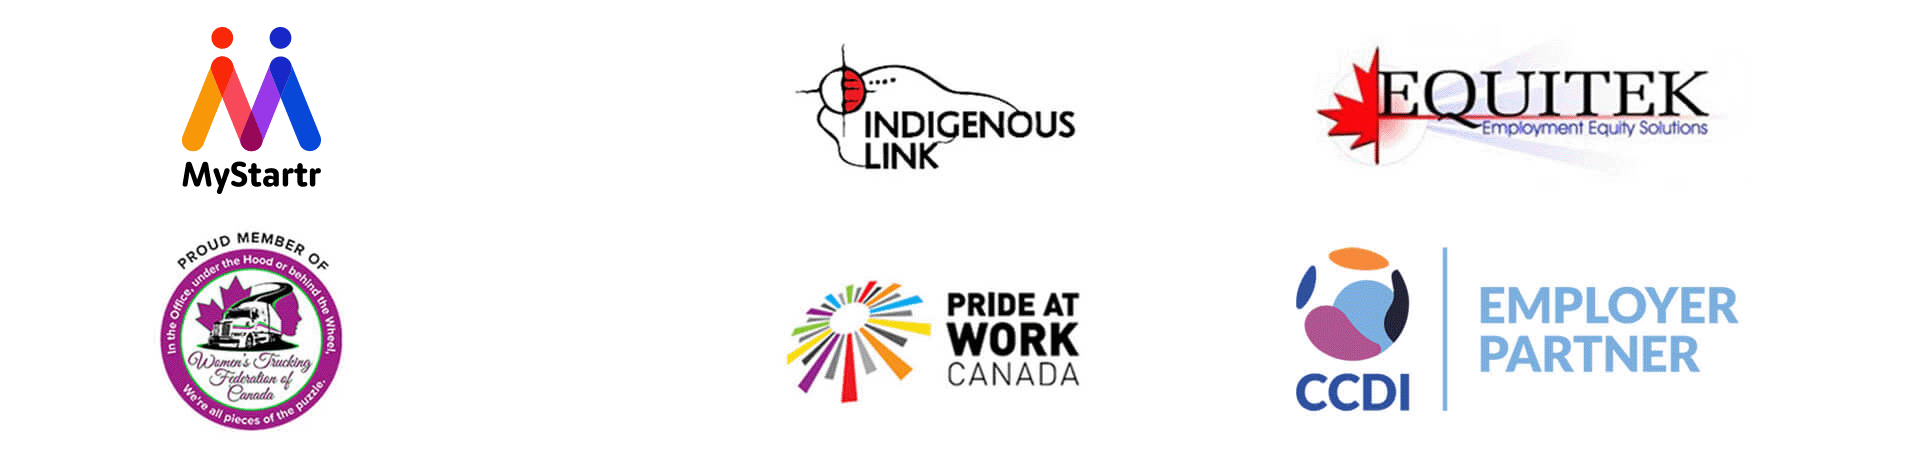 Partners Logo: Indigenous Link, Equitek, Opportunity for all Youth, Pride at work Canada, Women’s Trucking Federation of Canada